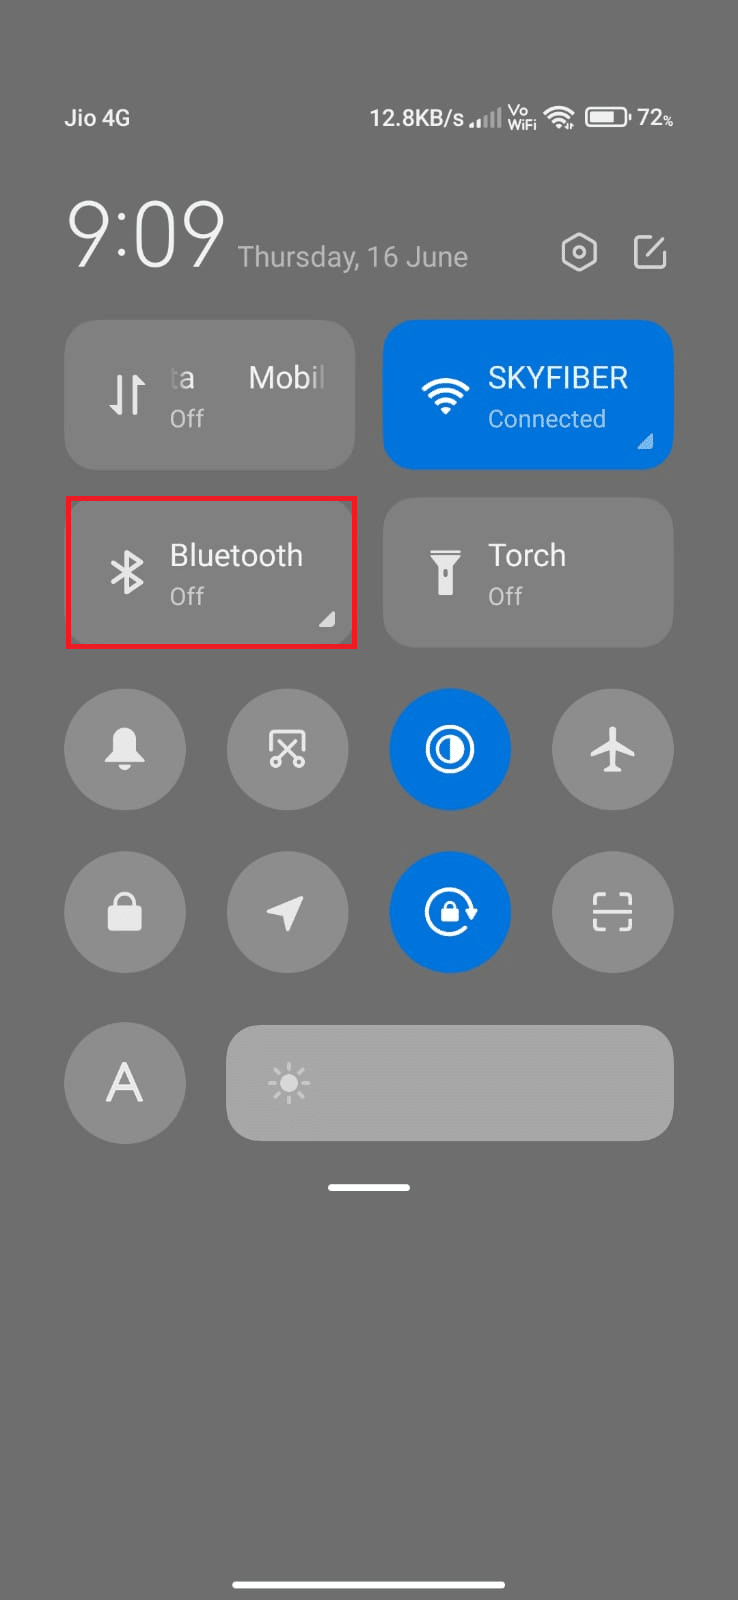 Tap on the Bluetooth icon to turn it off.